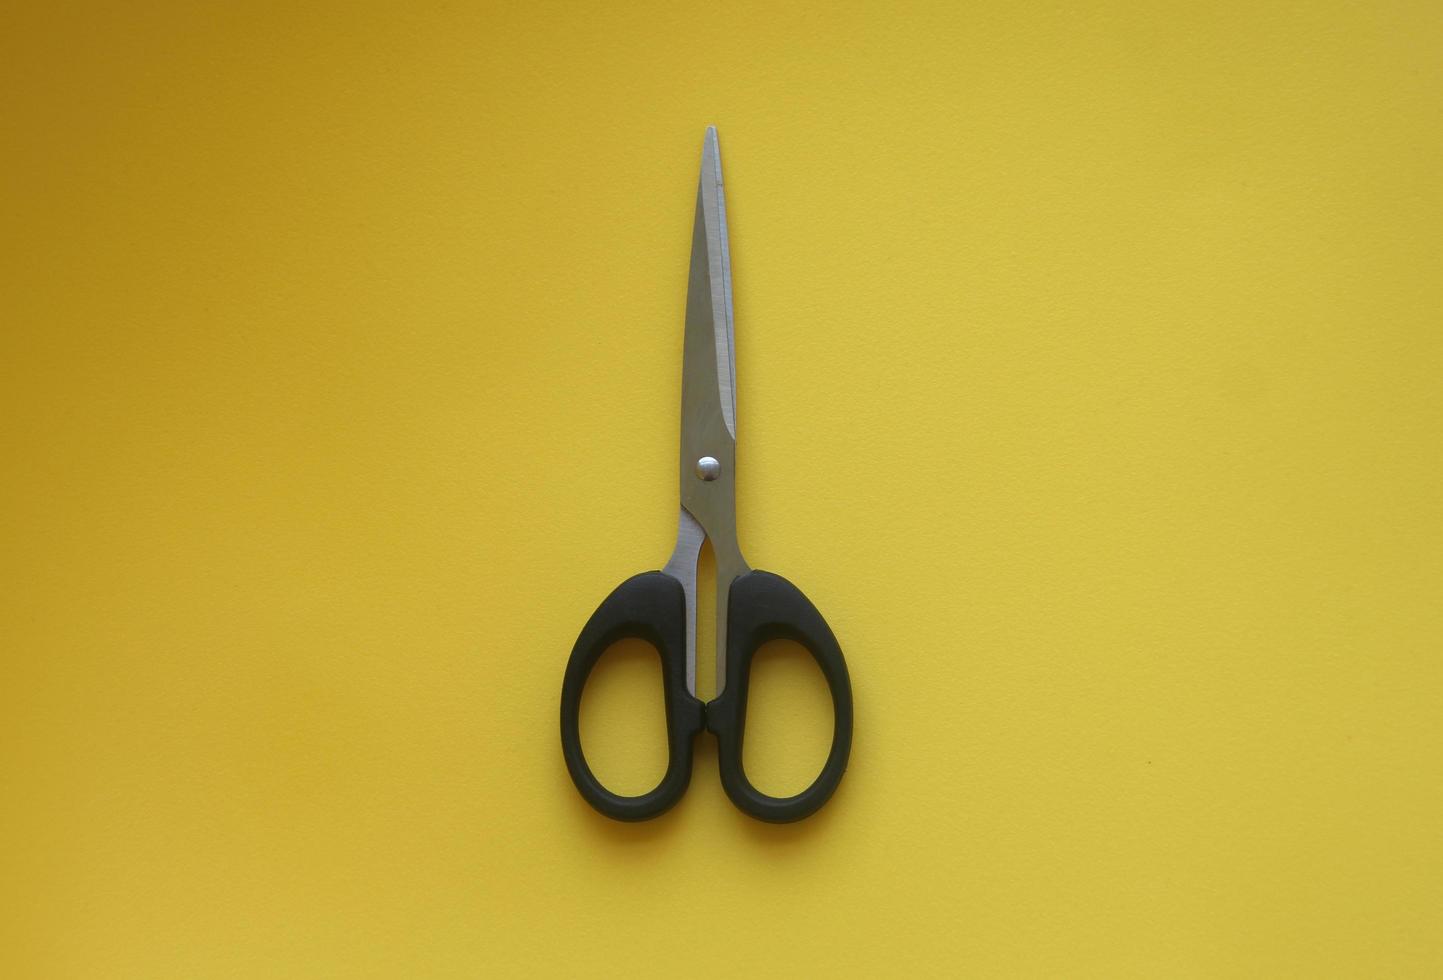 Black stainless steel scissors isolated photo on yellow background. School or office tools equipment object.